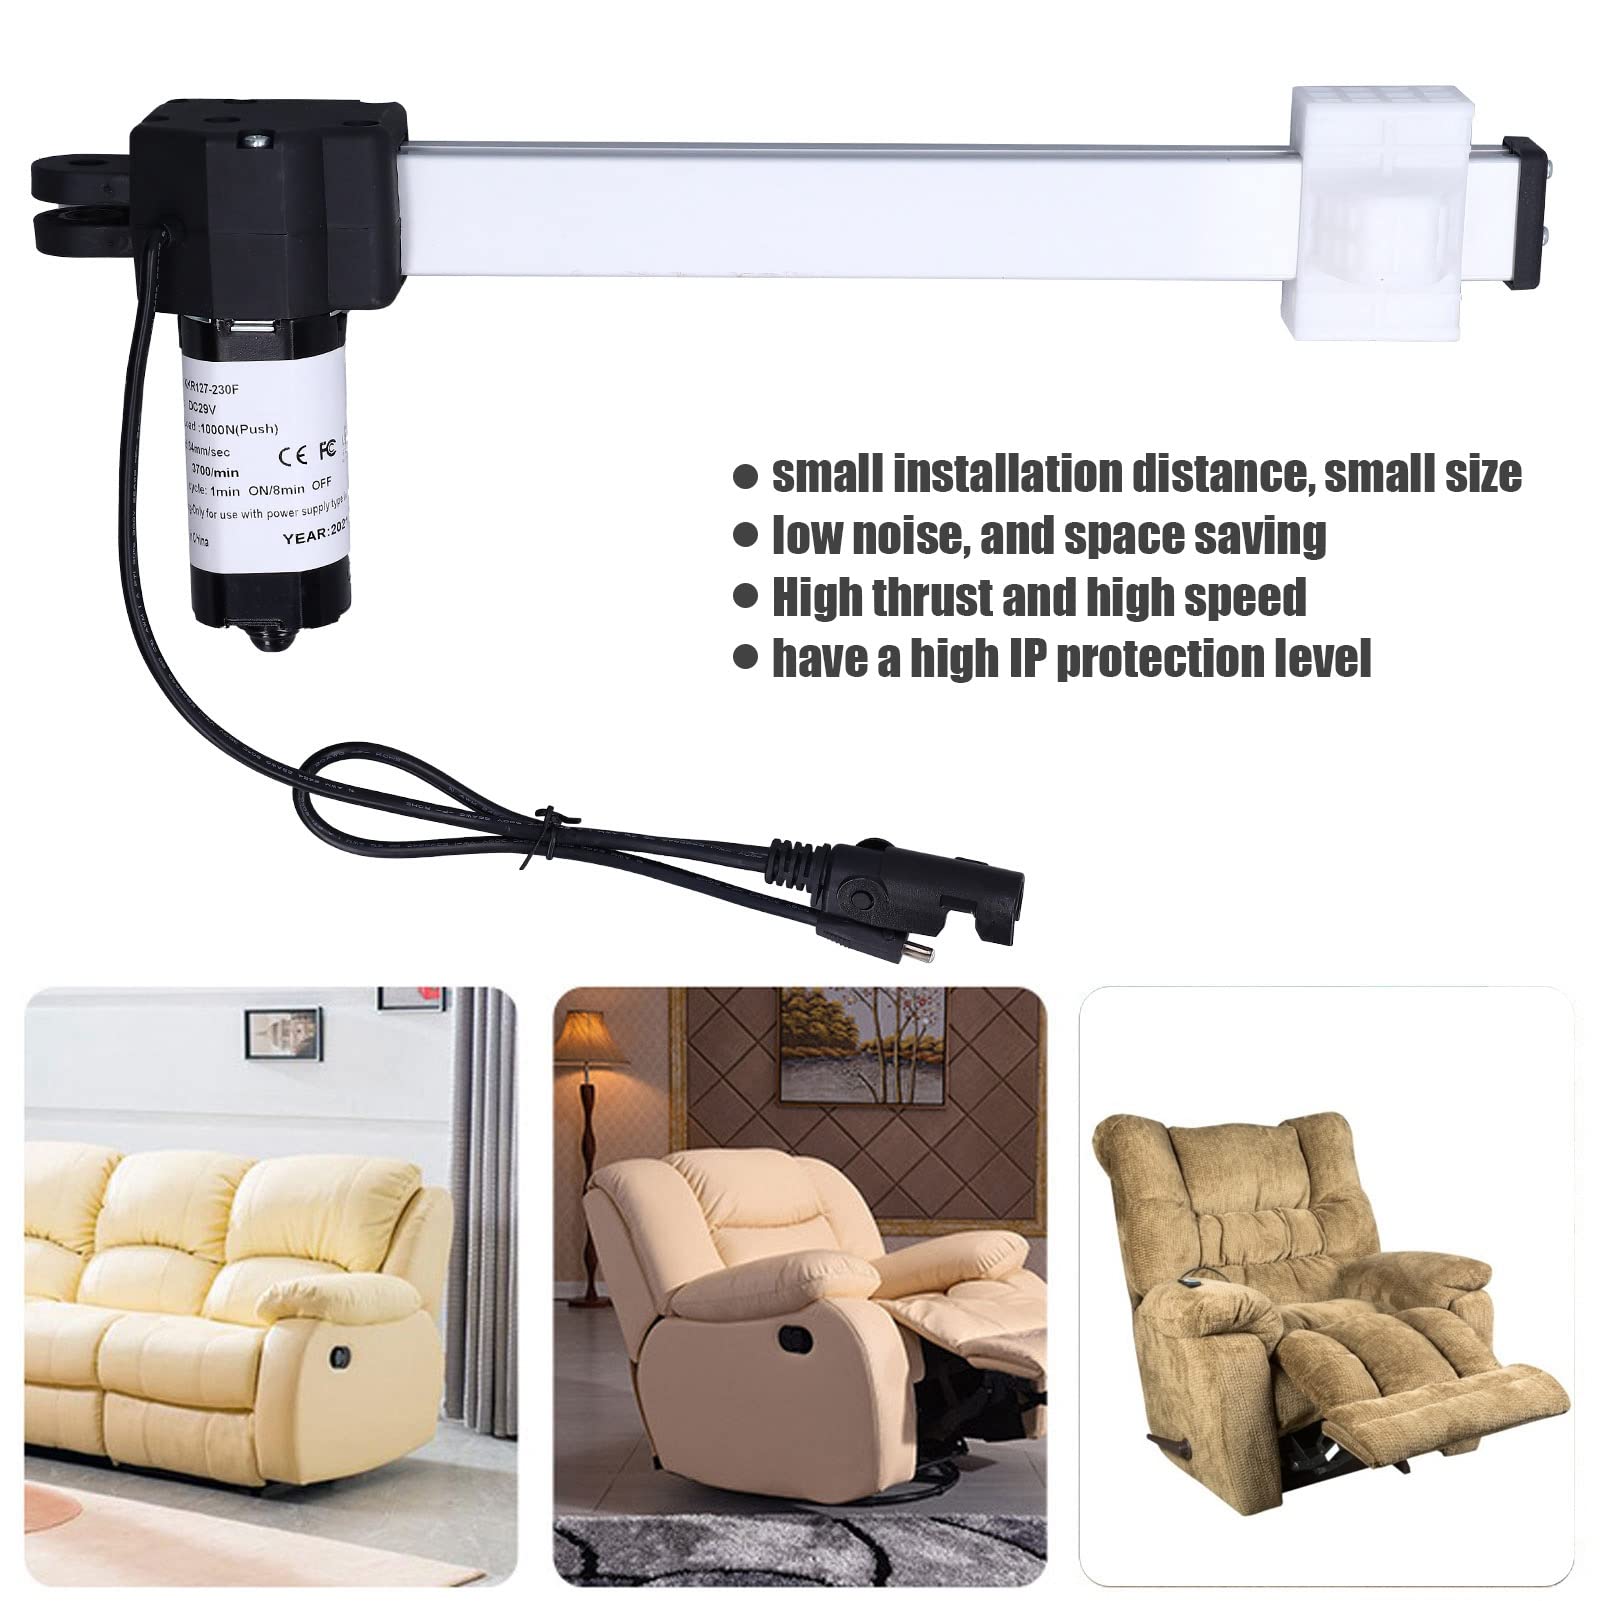 Cryfokt Power Recliner Lift Chair Motor, DC 29V Recliner Motor Actuator Replacement Kit with 1000N Large Thrust 230Mm Adjustable Sofa Lift Chairs Motor for Electric Bed, Electric Sofa